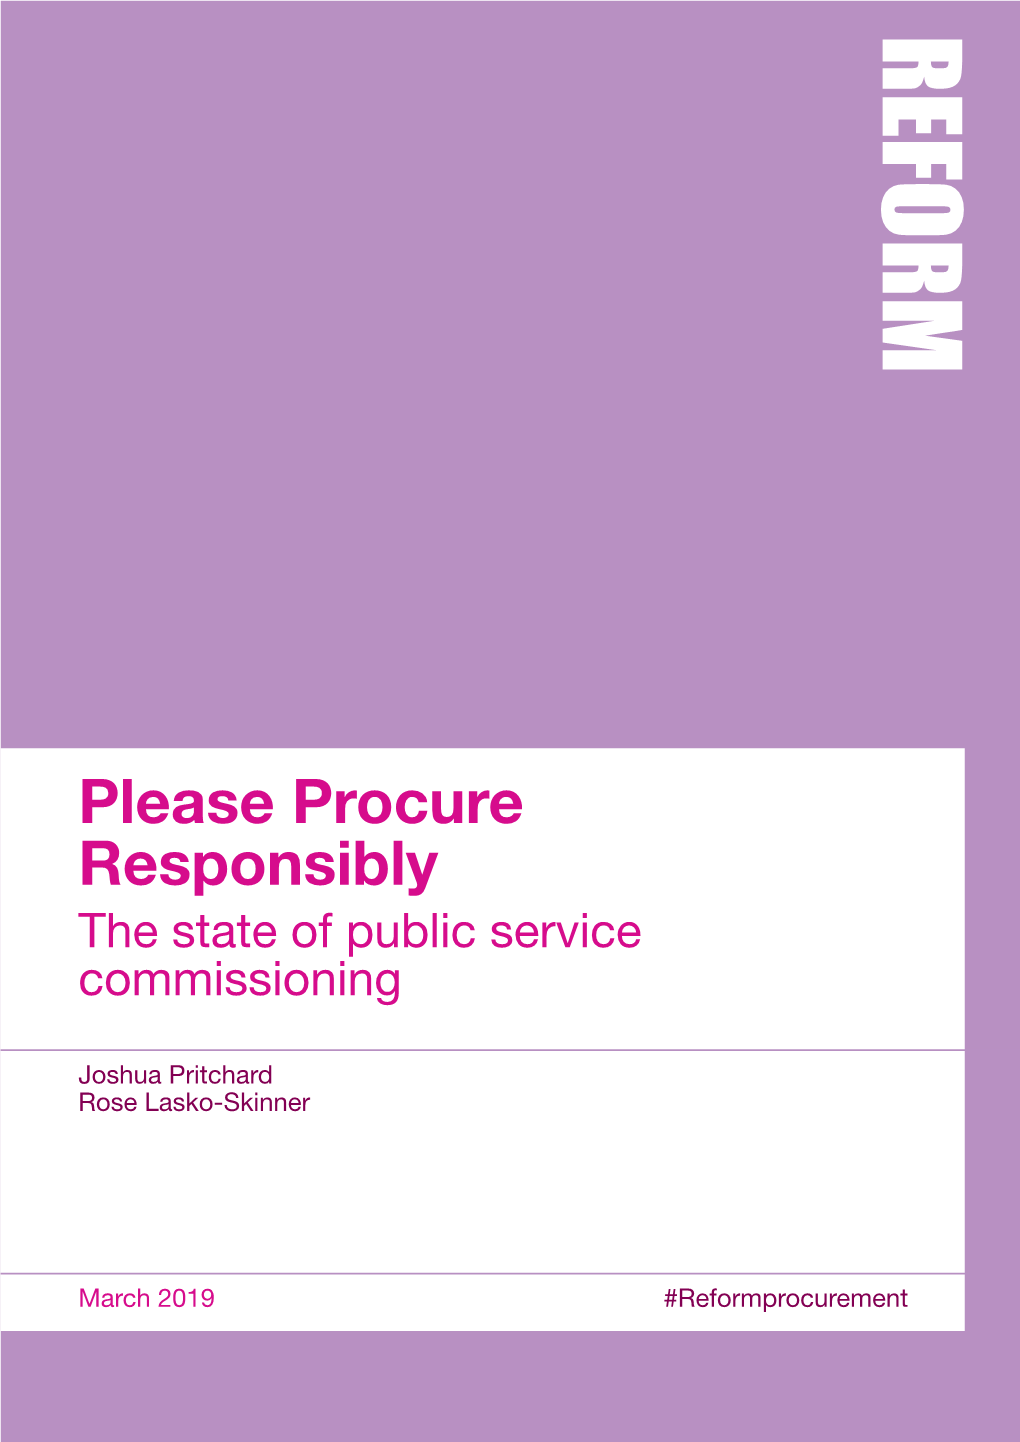 Please Procure Responsibly the State of Public Service Commissioning